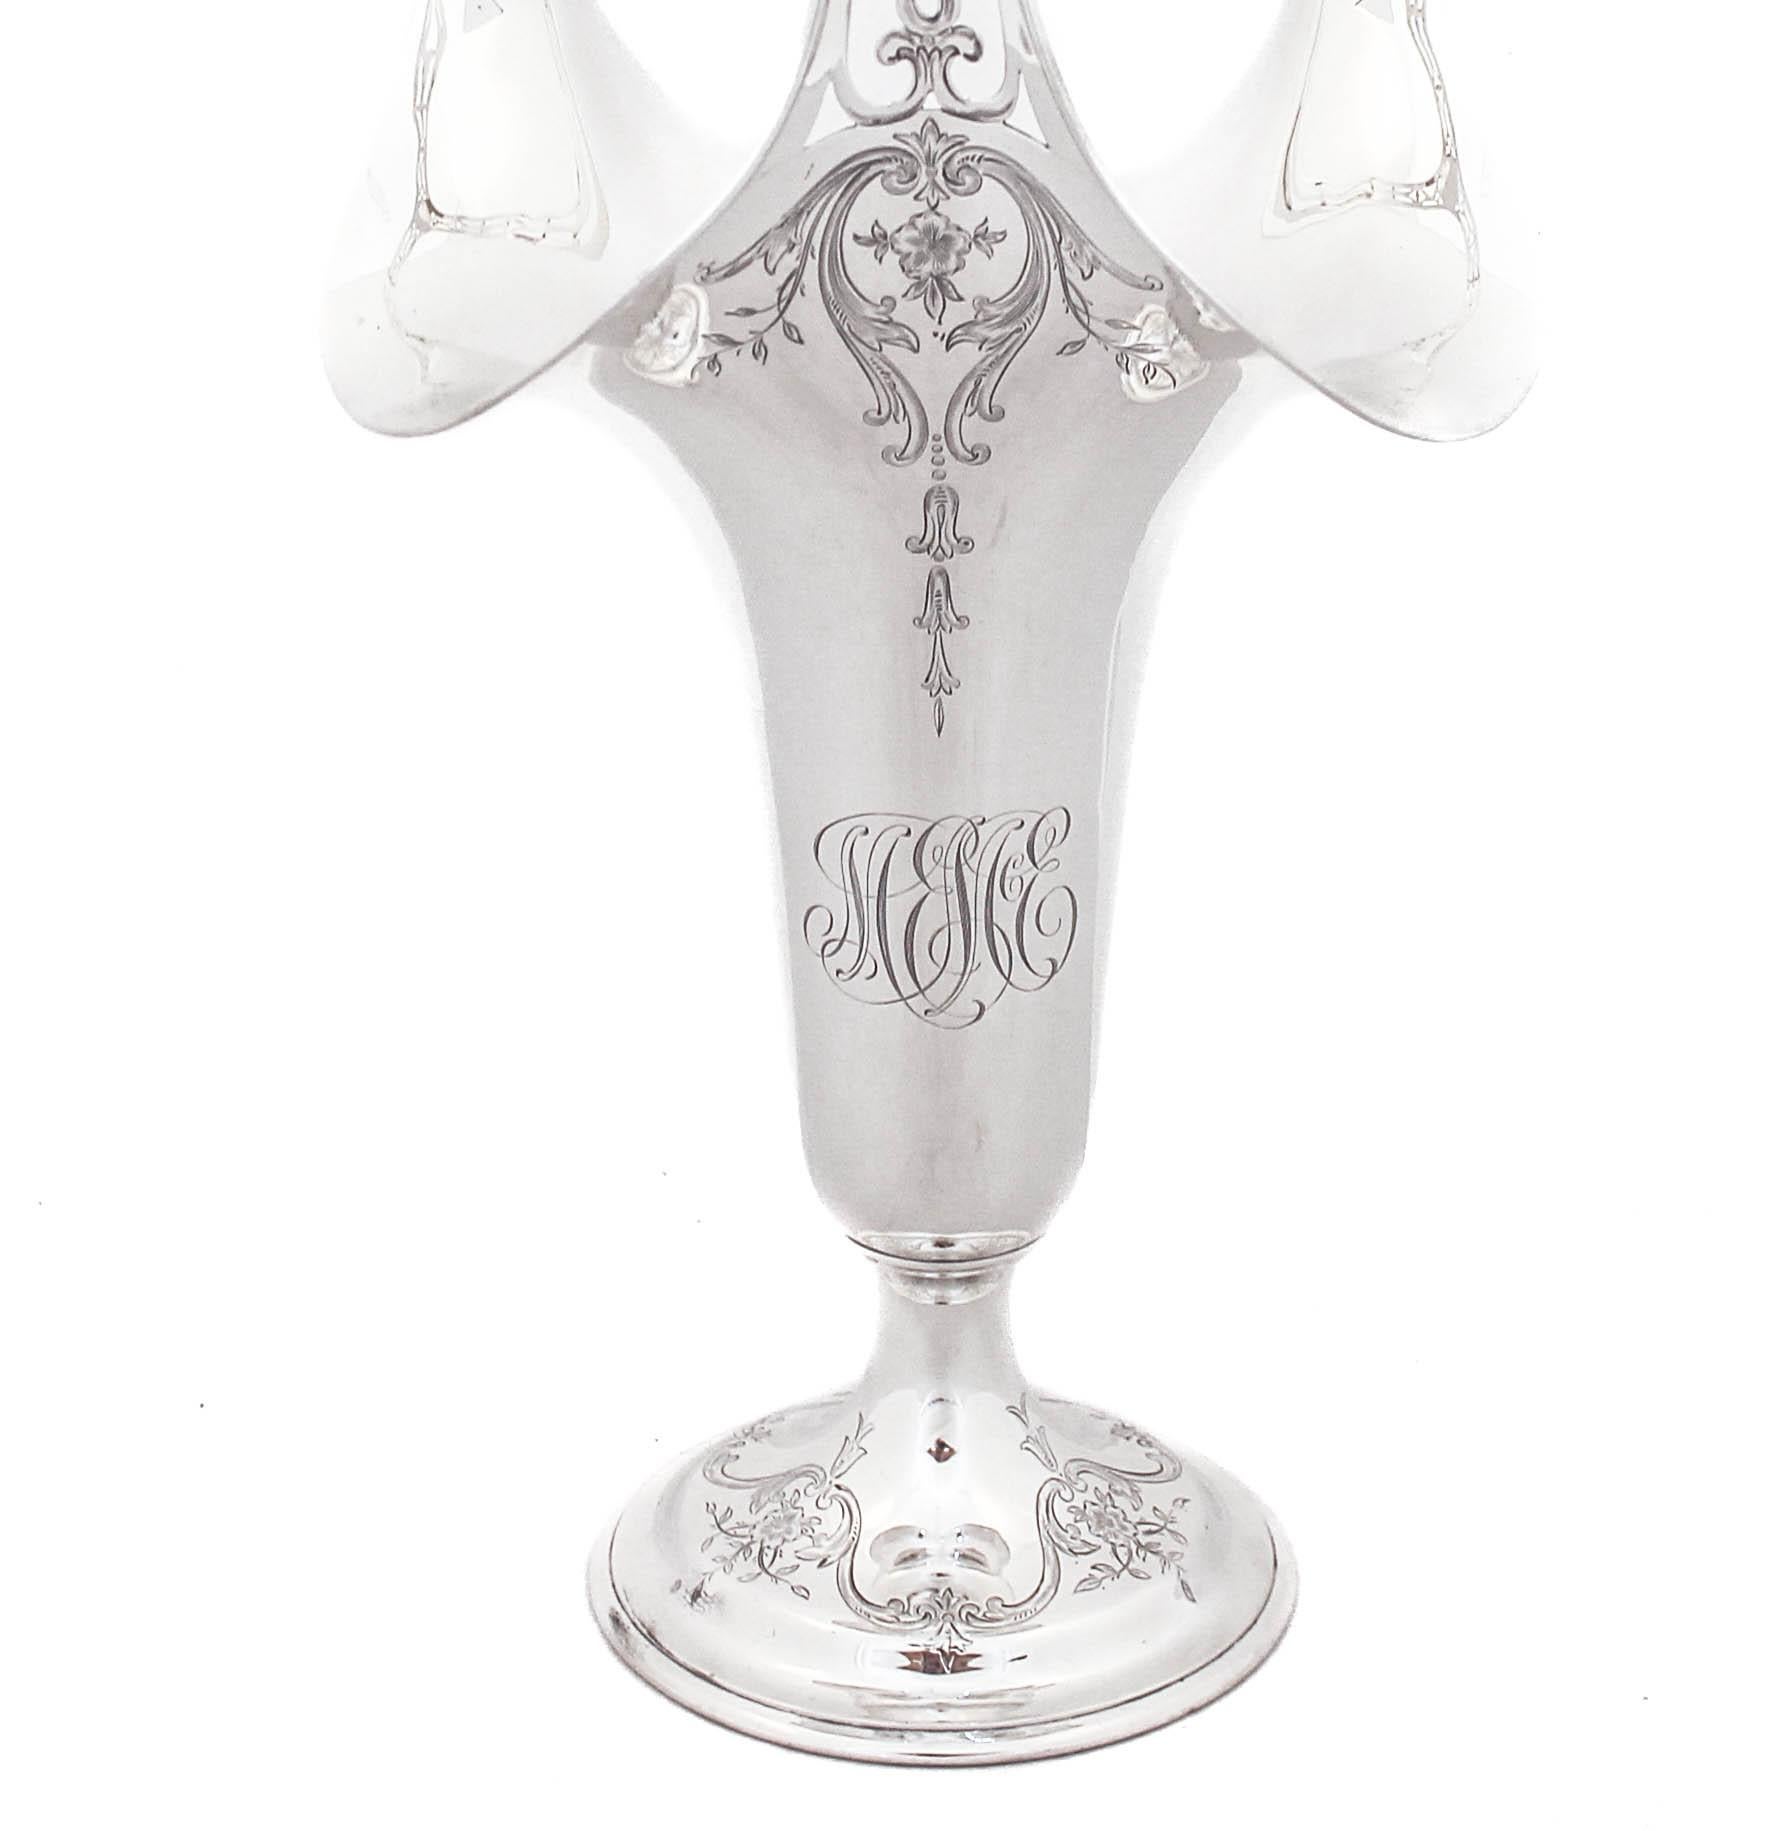 We are proudly offering a sterling silver vase by Whiting Manufacturer hallmarked 1920.  It has a fluted rim with a three-handle.  The three-handle is reticulated and has a dome-like shape.  The body of the vase is tapered and feminine with